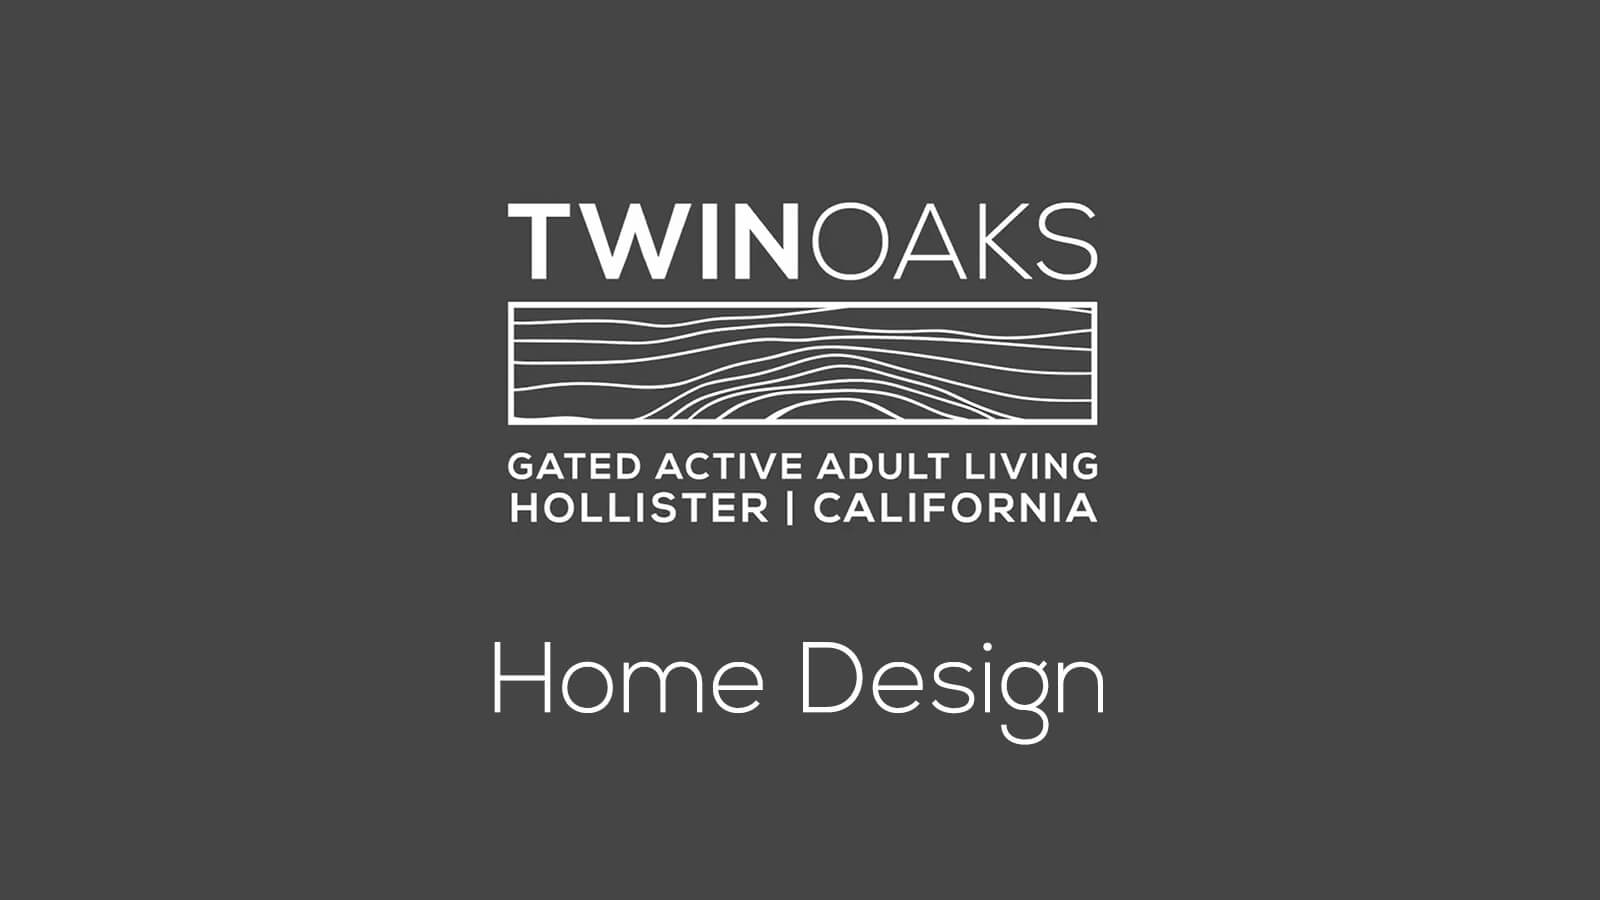 Video: Twin Oaks gated active adult living - Home Design